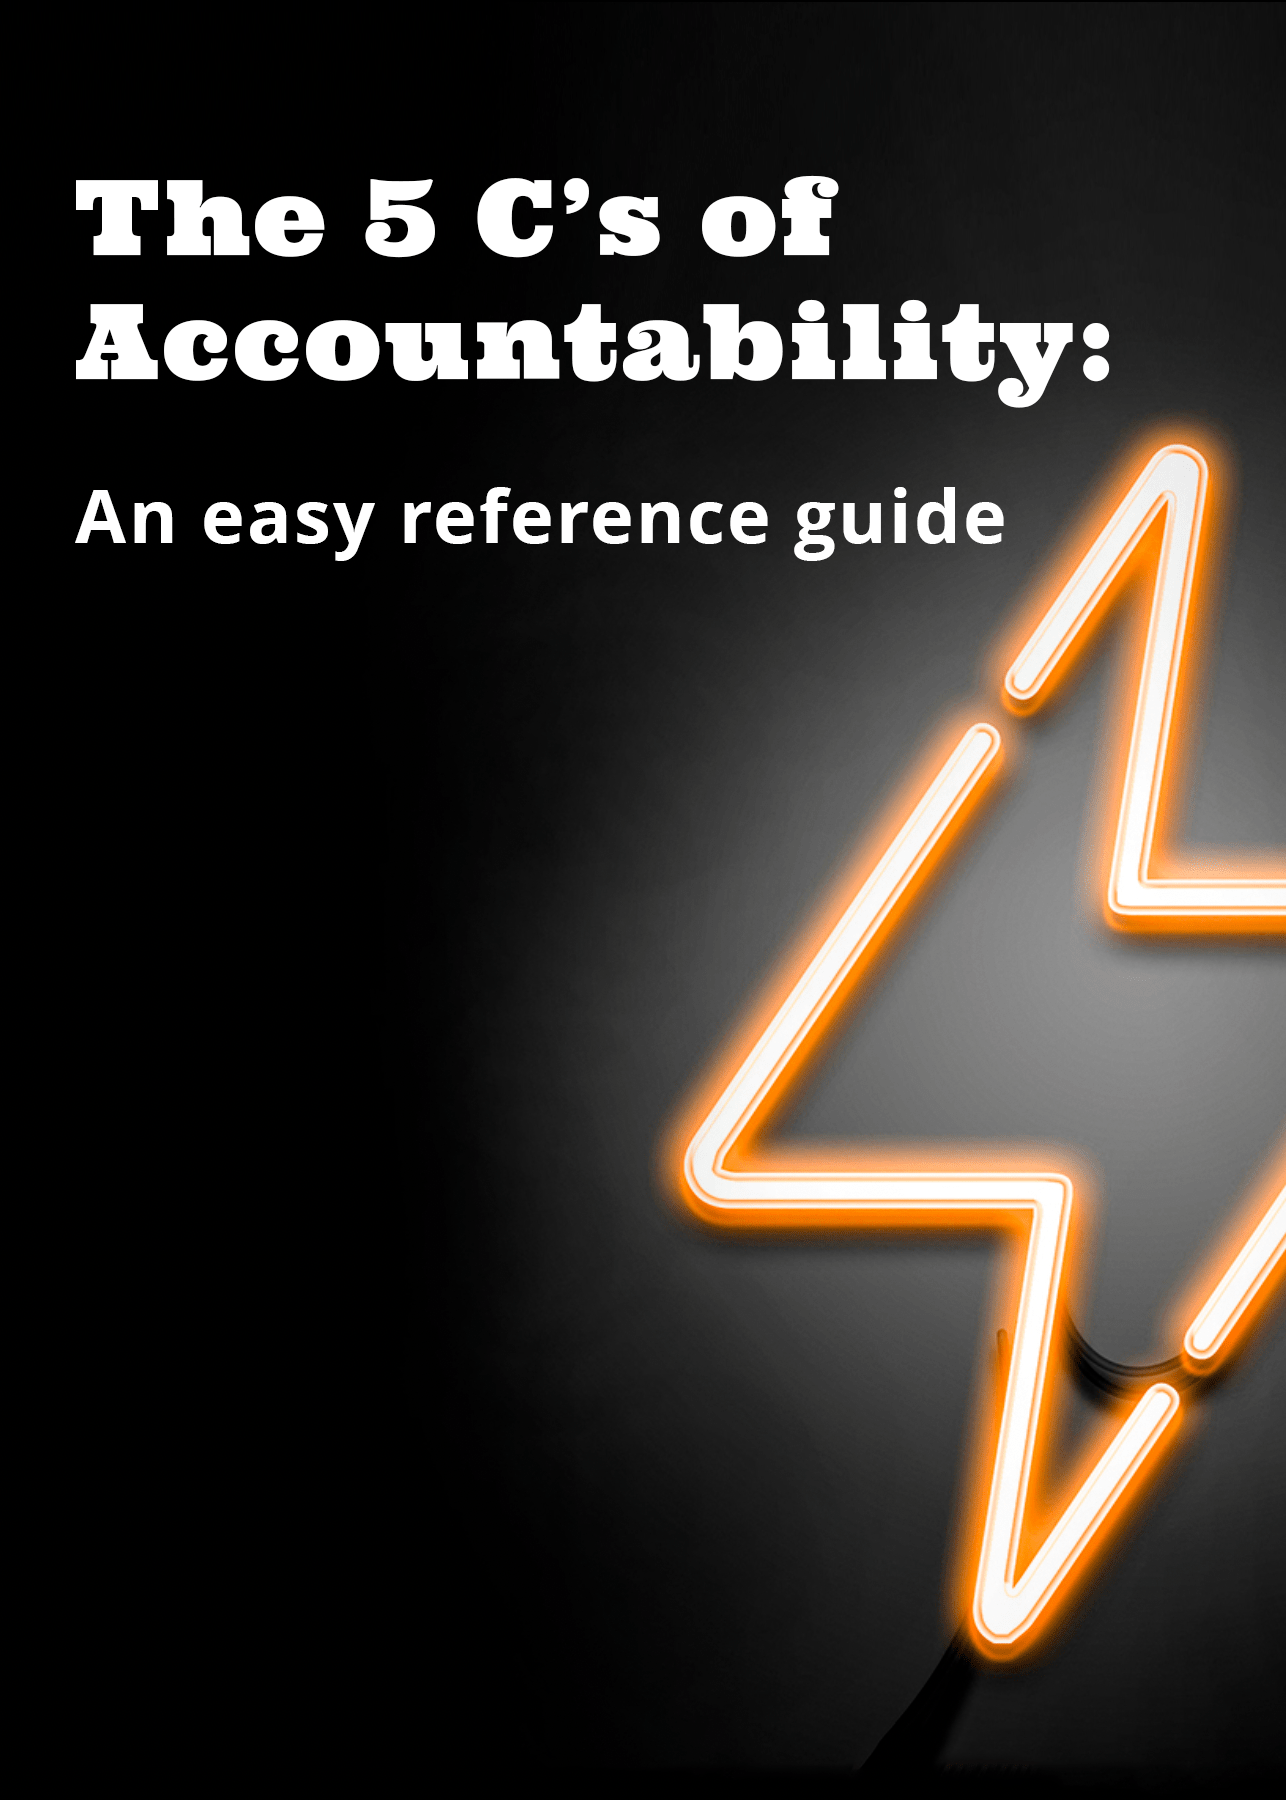 The 5 C's of Accountability reference guide